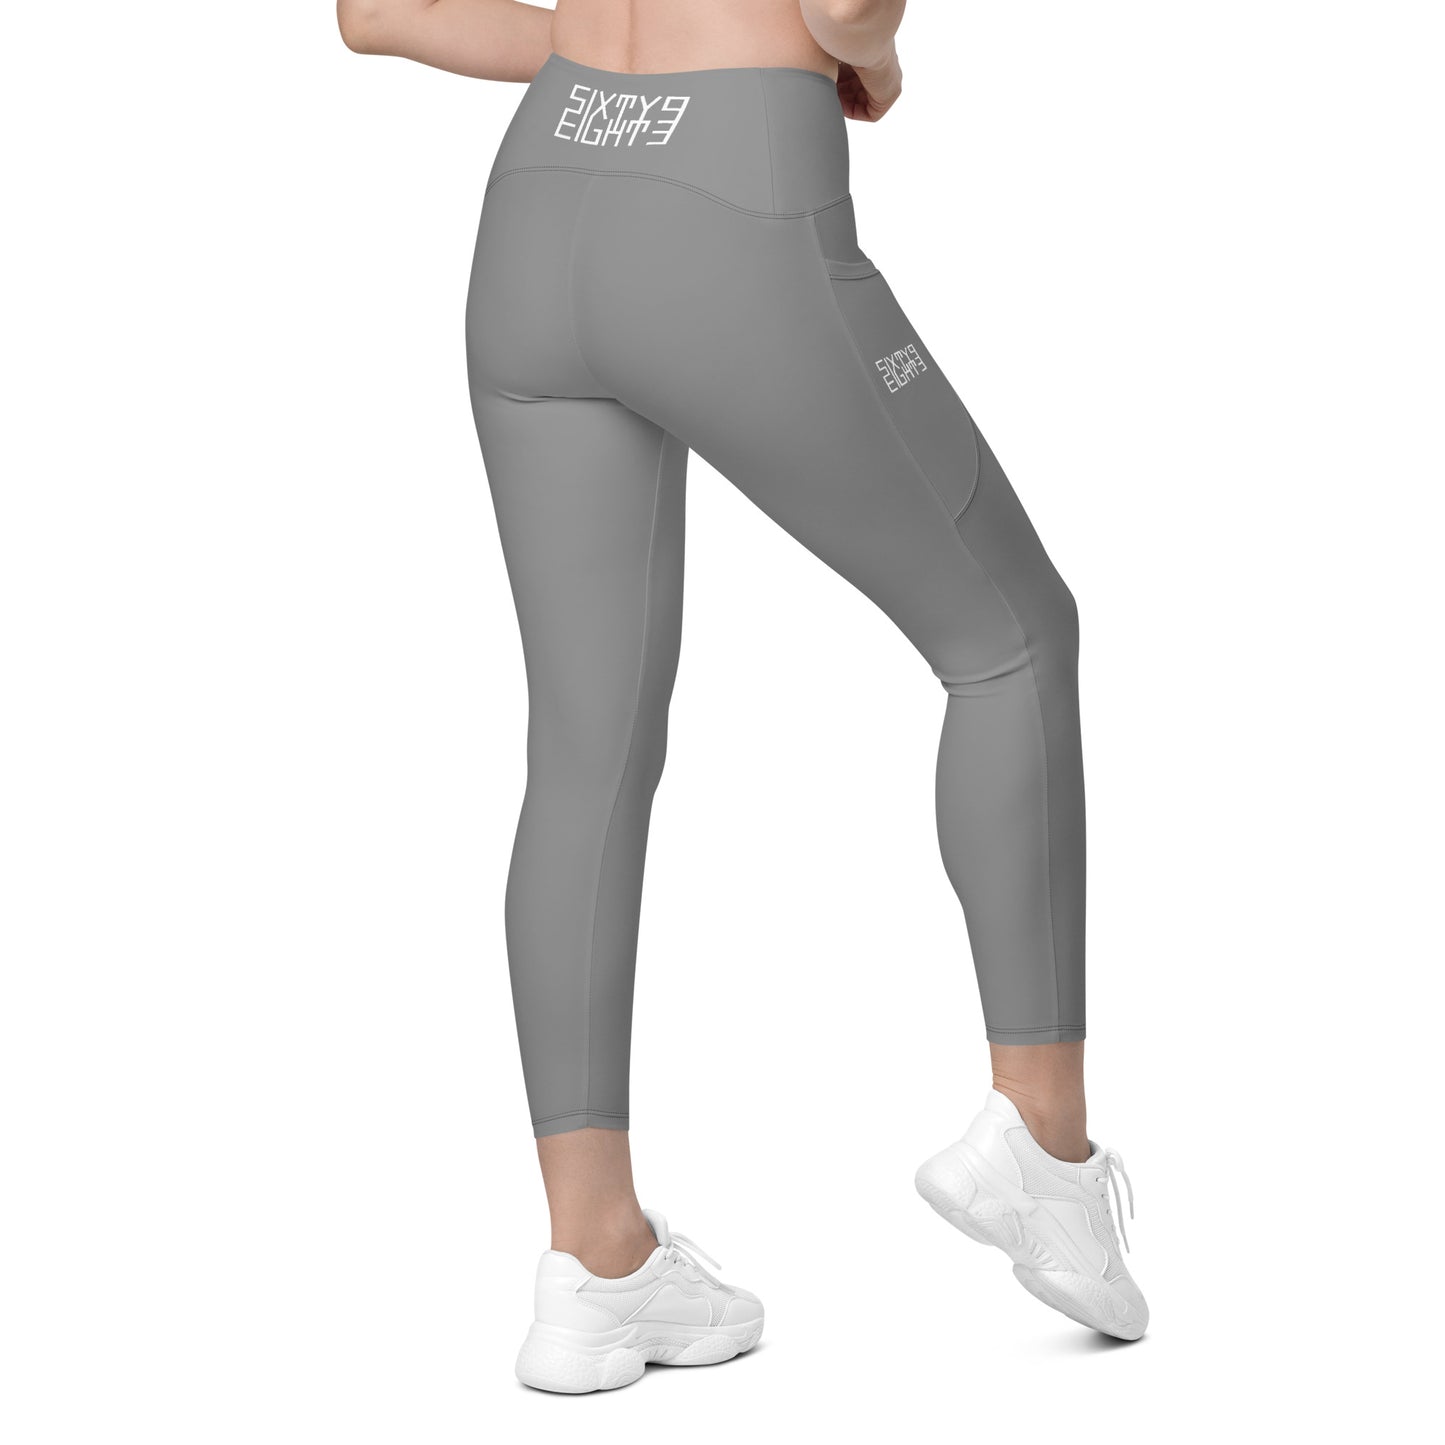 Sixty Eight 93 Logo White Grey Crossover Leggings with pockets